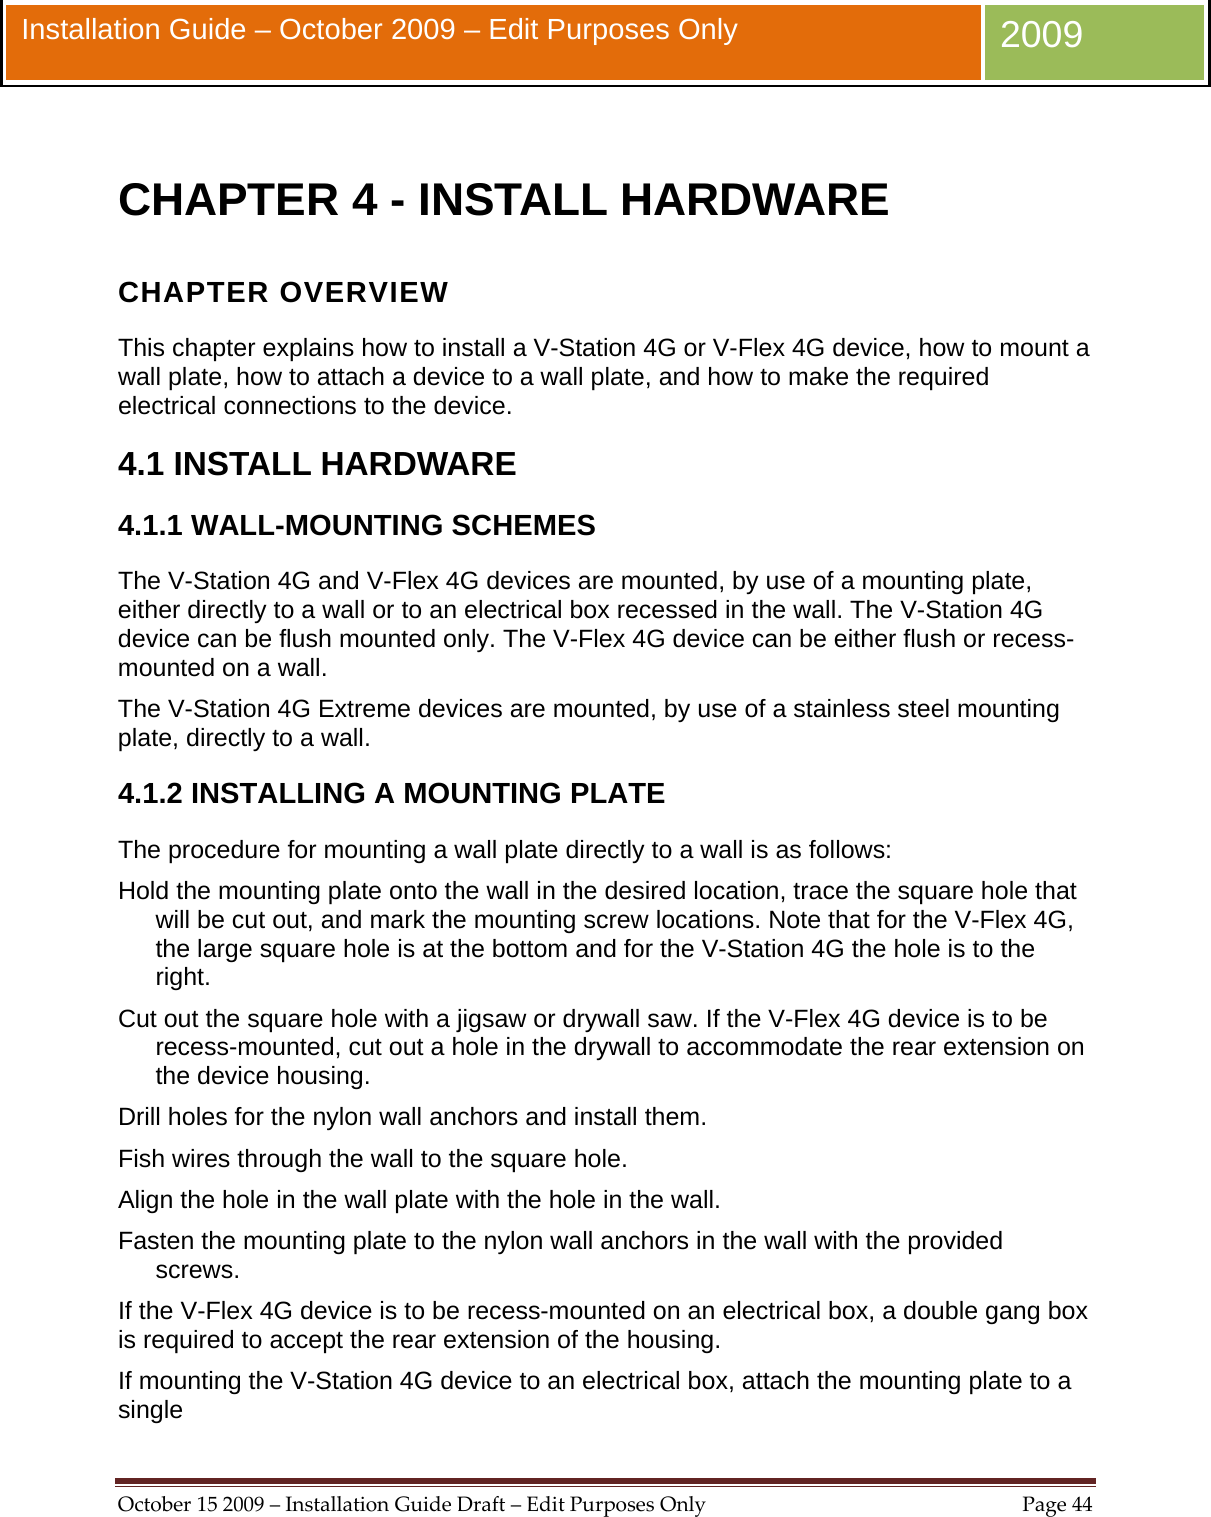  October152009–InstallationGuideDraft–EditPurposesOnlyPage44 Installation Guide – October 2009 – Edit Purposes Only  2009  CHAPTER 4 - INSTALL HARDWARE CHAPTER OVERVIEW This chapter explains how to install a V-Station 4G or V-Flex 4G device, how to mount a wall plate, how to attach a device to a wall plate, and how to make the required electrical connections to the device. 4.1 INSTALL HARDWARE 4.1.1 WALL-MOUNTING SCHEMES The V-Station 4G and V-Flex 4G devices are mounted, by use of a mounting plate, either directly to a wall or to an electrical box recessed in the wall. The V-Station 4G device can be flush mounted only. The V-Flex 4G device can be either flush or recess-mounted on a wall. The V-Station 4G Extreme devices are mounted, by use of a stainless steel mounting plate, directly to a wall. 4.1.2 INSTALLING A MOUNTING PLATE The procedure for mounting a wall plate directly to a wall is as follows: Hold the mounting plate onto the wall in the desired location, trace the square hole that will be cut out, and mark the mounting screw locations. Note that for the V-Flex 4G, the large square hole is at the bottom and for the V-Station 4G the hole is to the right. Cut out the square hole with a jigsaw or drywall saw. If the V-Flex 4G device is to be recess-mounted, cut out a hole in the drywall to accommodate the rear extension on the device housing. Drill holes for the nylon wall anchors and install them. Fish wires through the wall to the square hole. Align the hole in the wall plate with the hole in the wall. Fasten the mounting plate to the nylon wall anchors in the wall with the provided screws. If the V-Flex 4G device is to be recess-mounted on an electrical box, a double gang box is required to accept the rear extension of the housing. If mounting the V-Station 4G device to an electrical box, attach the mounting plate to a single 